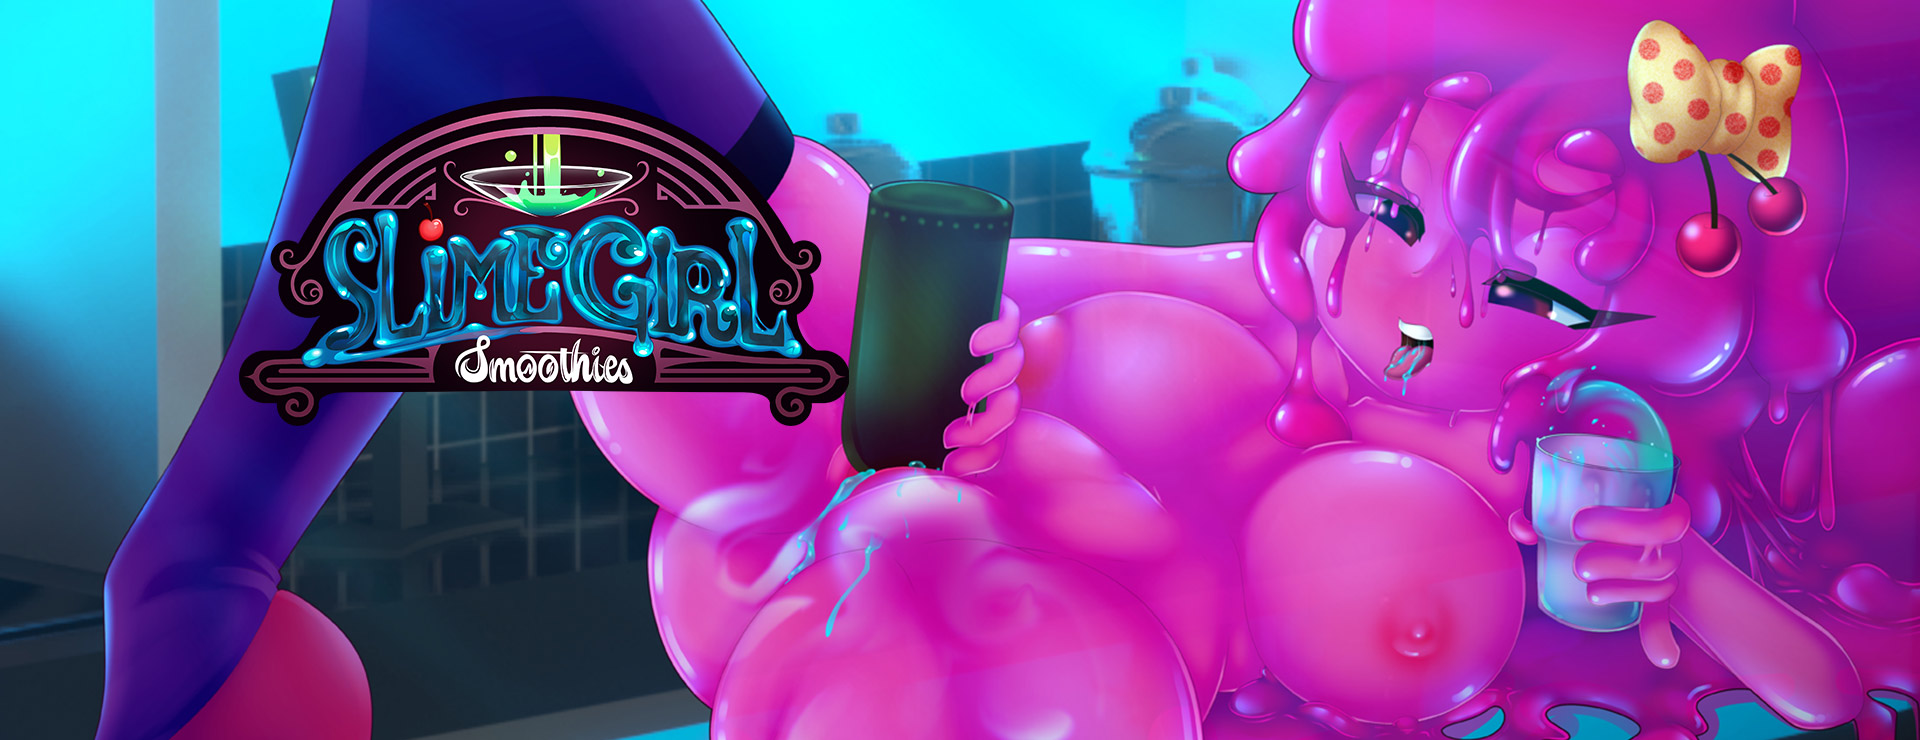 Slime Girl Smoothies - Casual Jeu